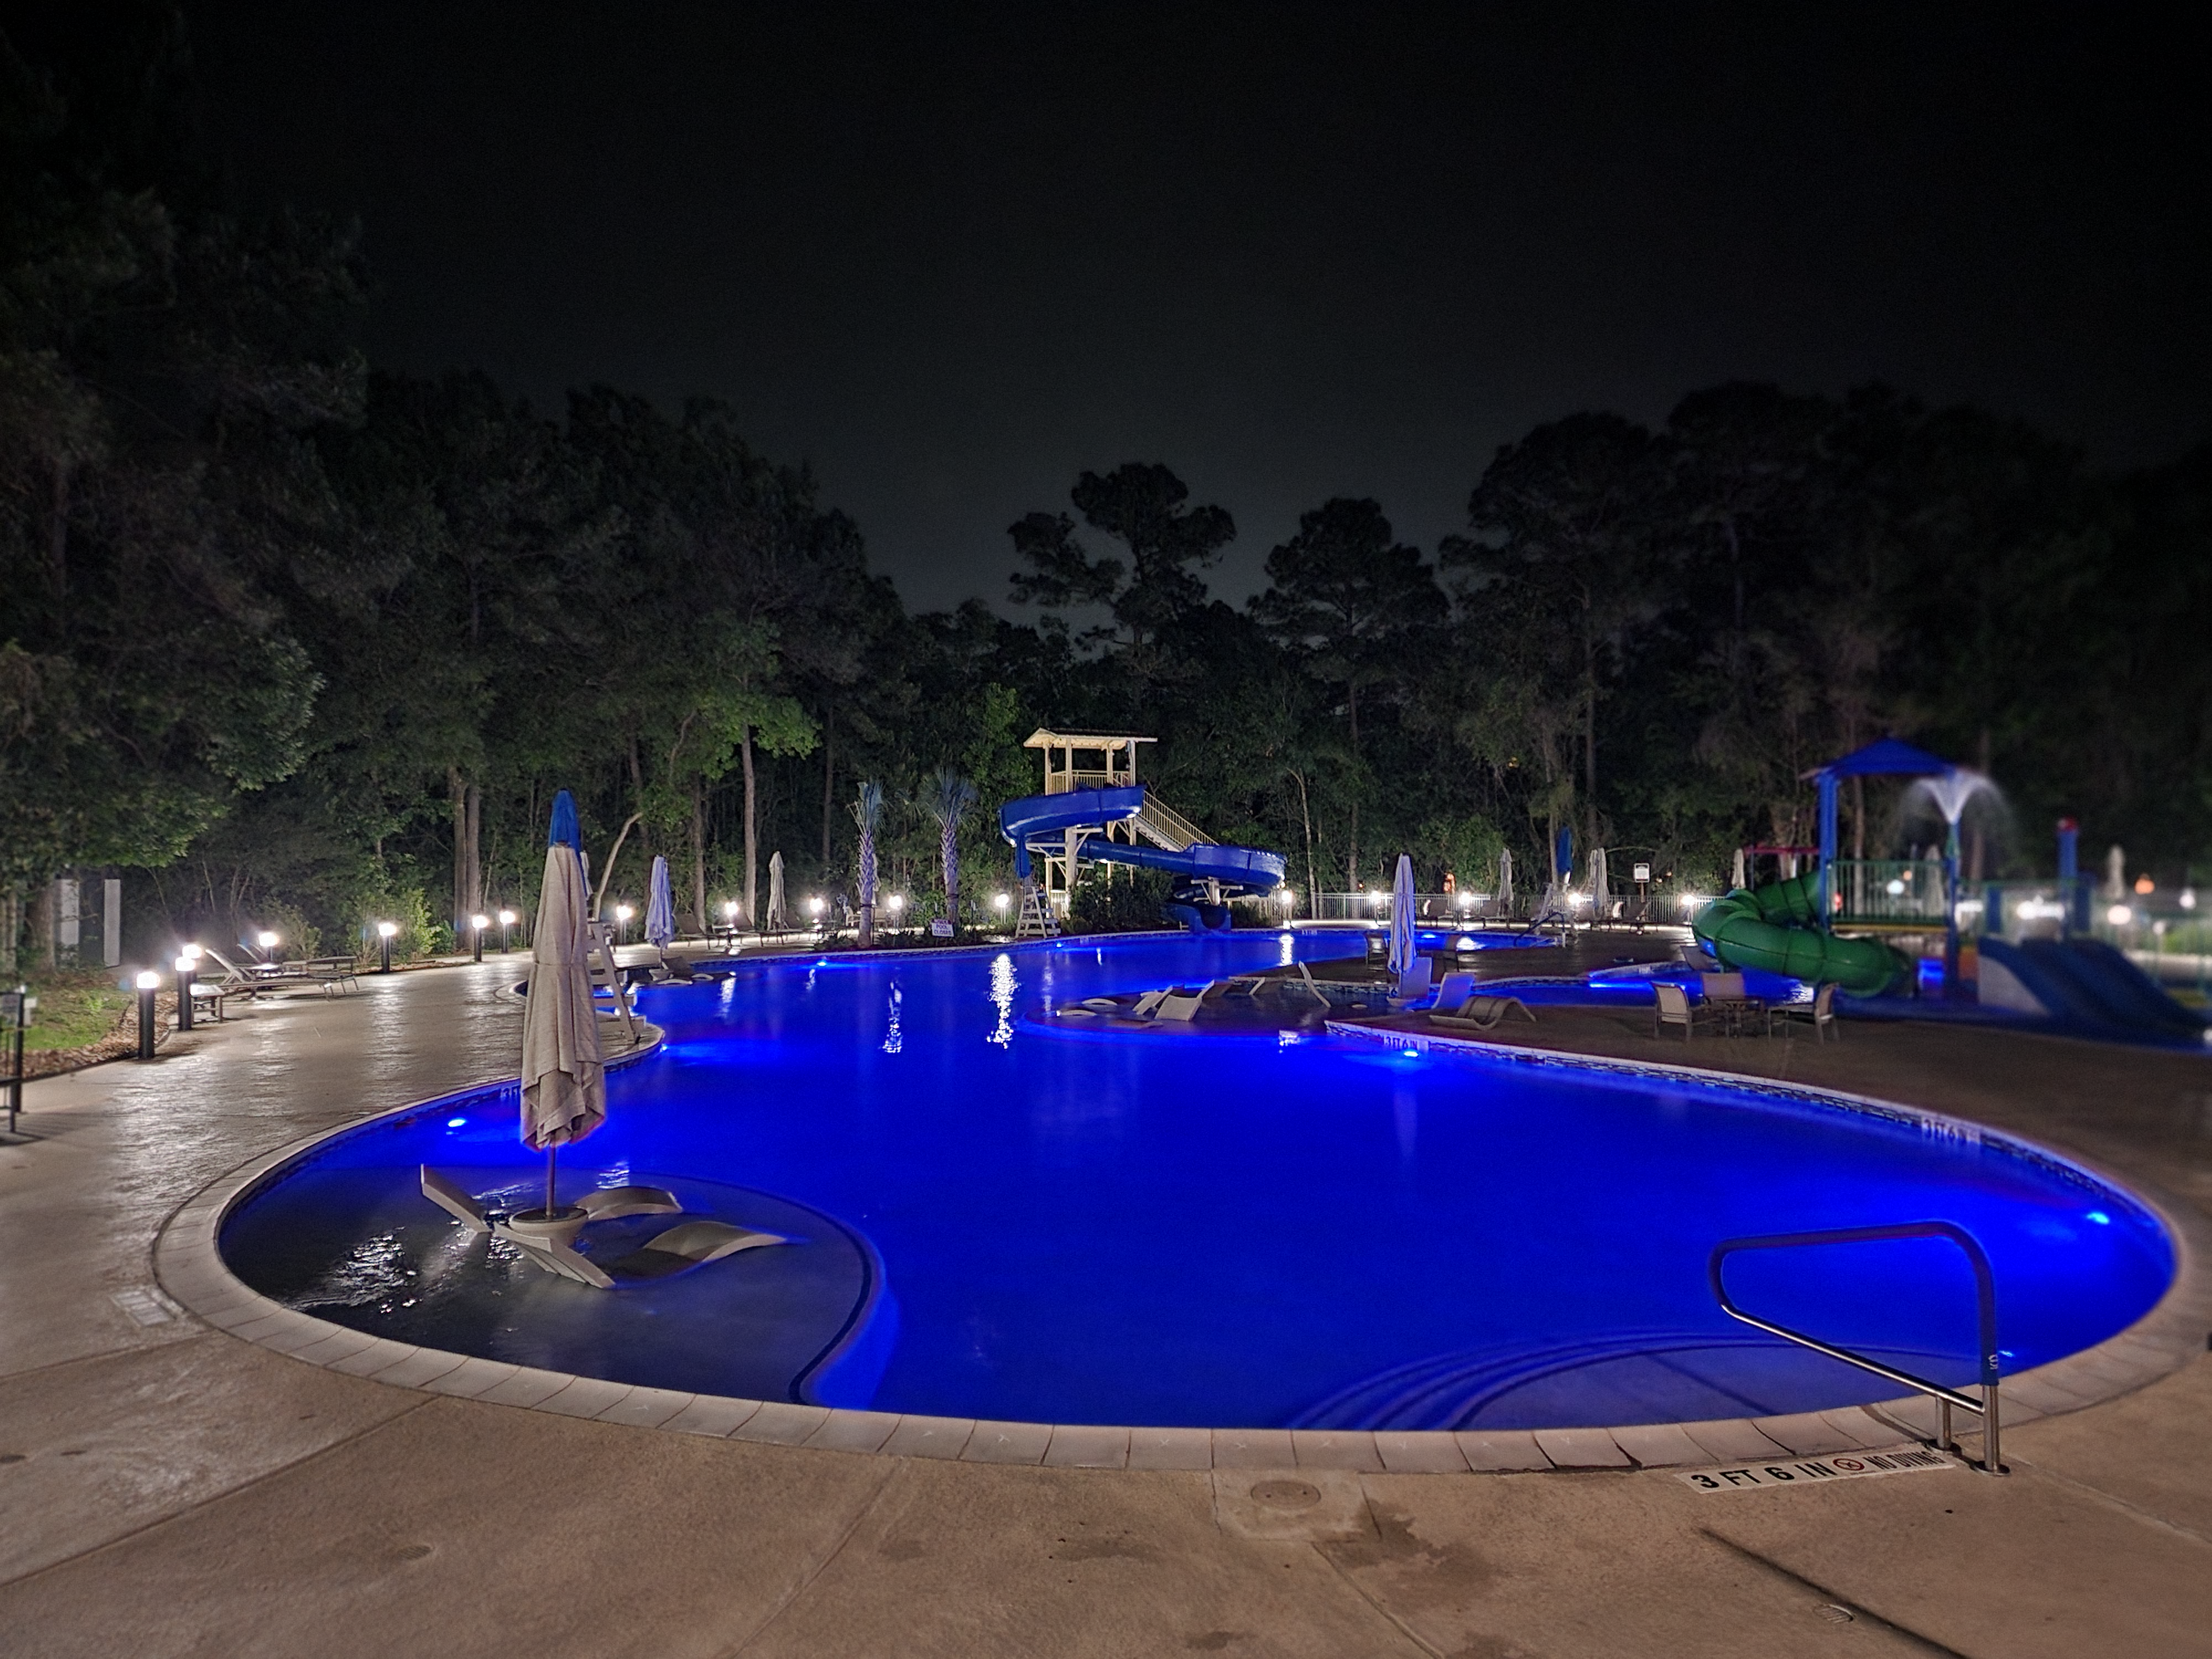 Resort-style pool at night with color changing LED pool lights - May 2022 thumbnail